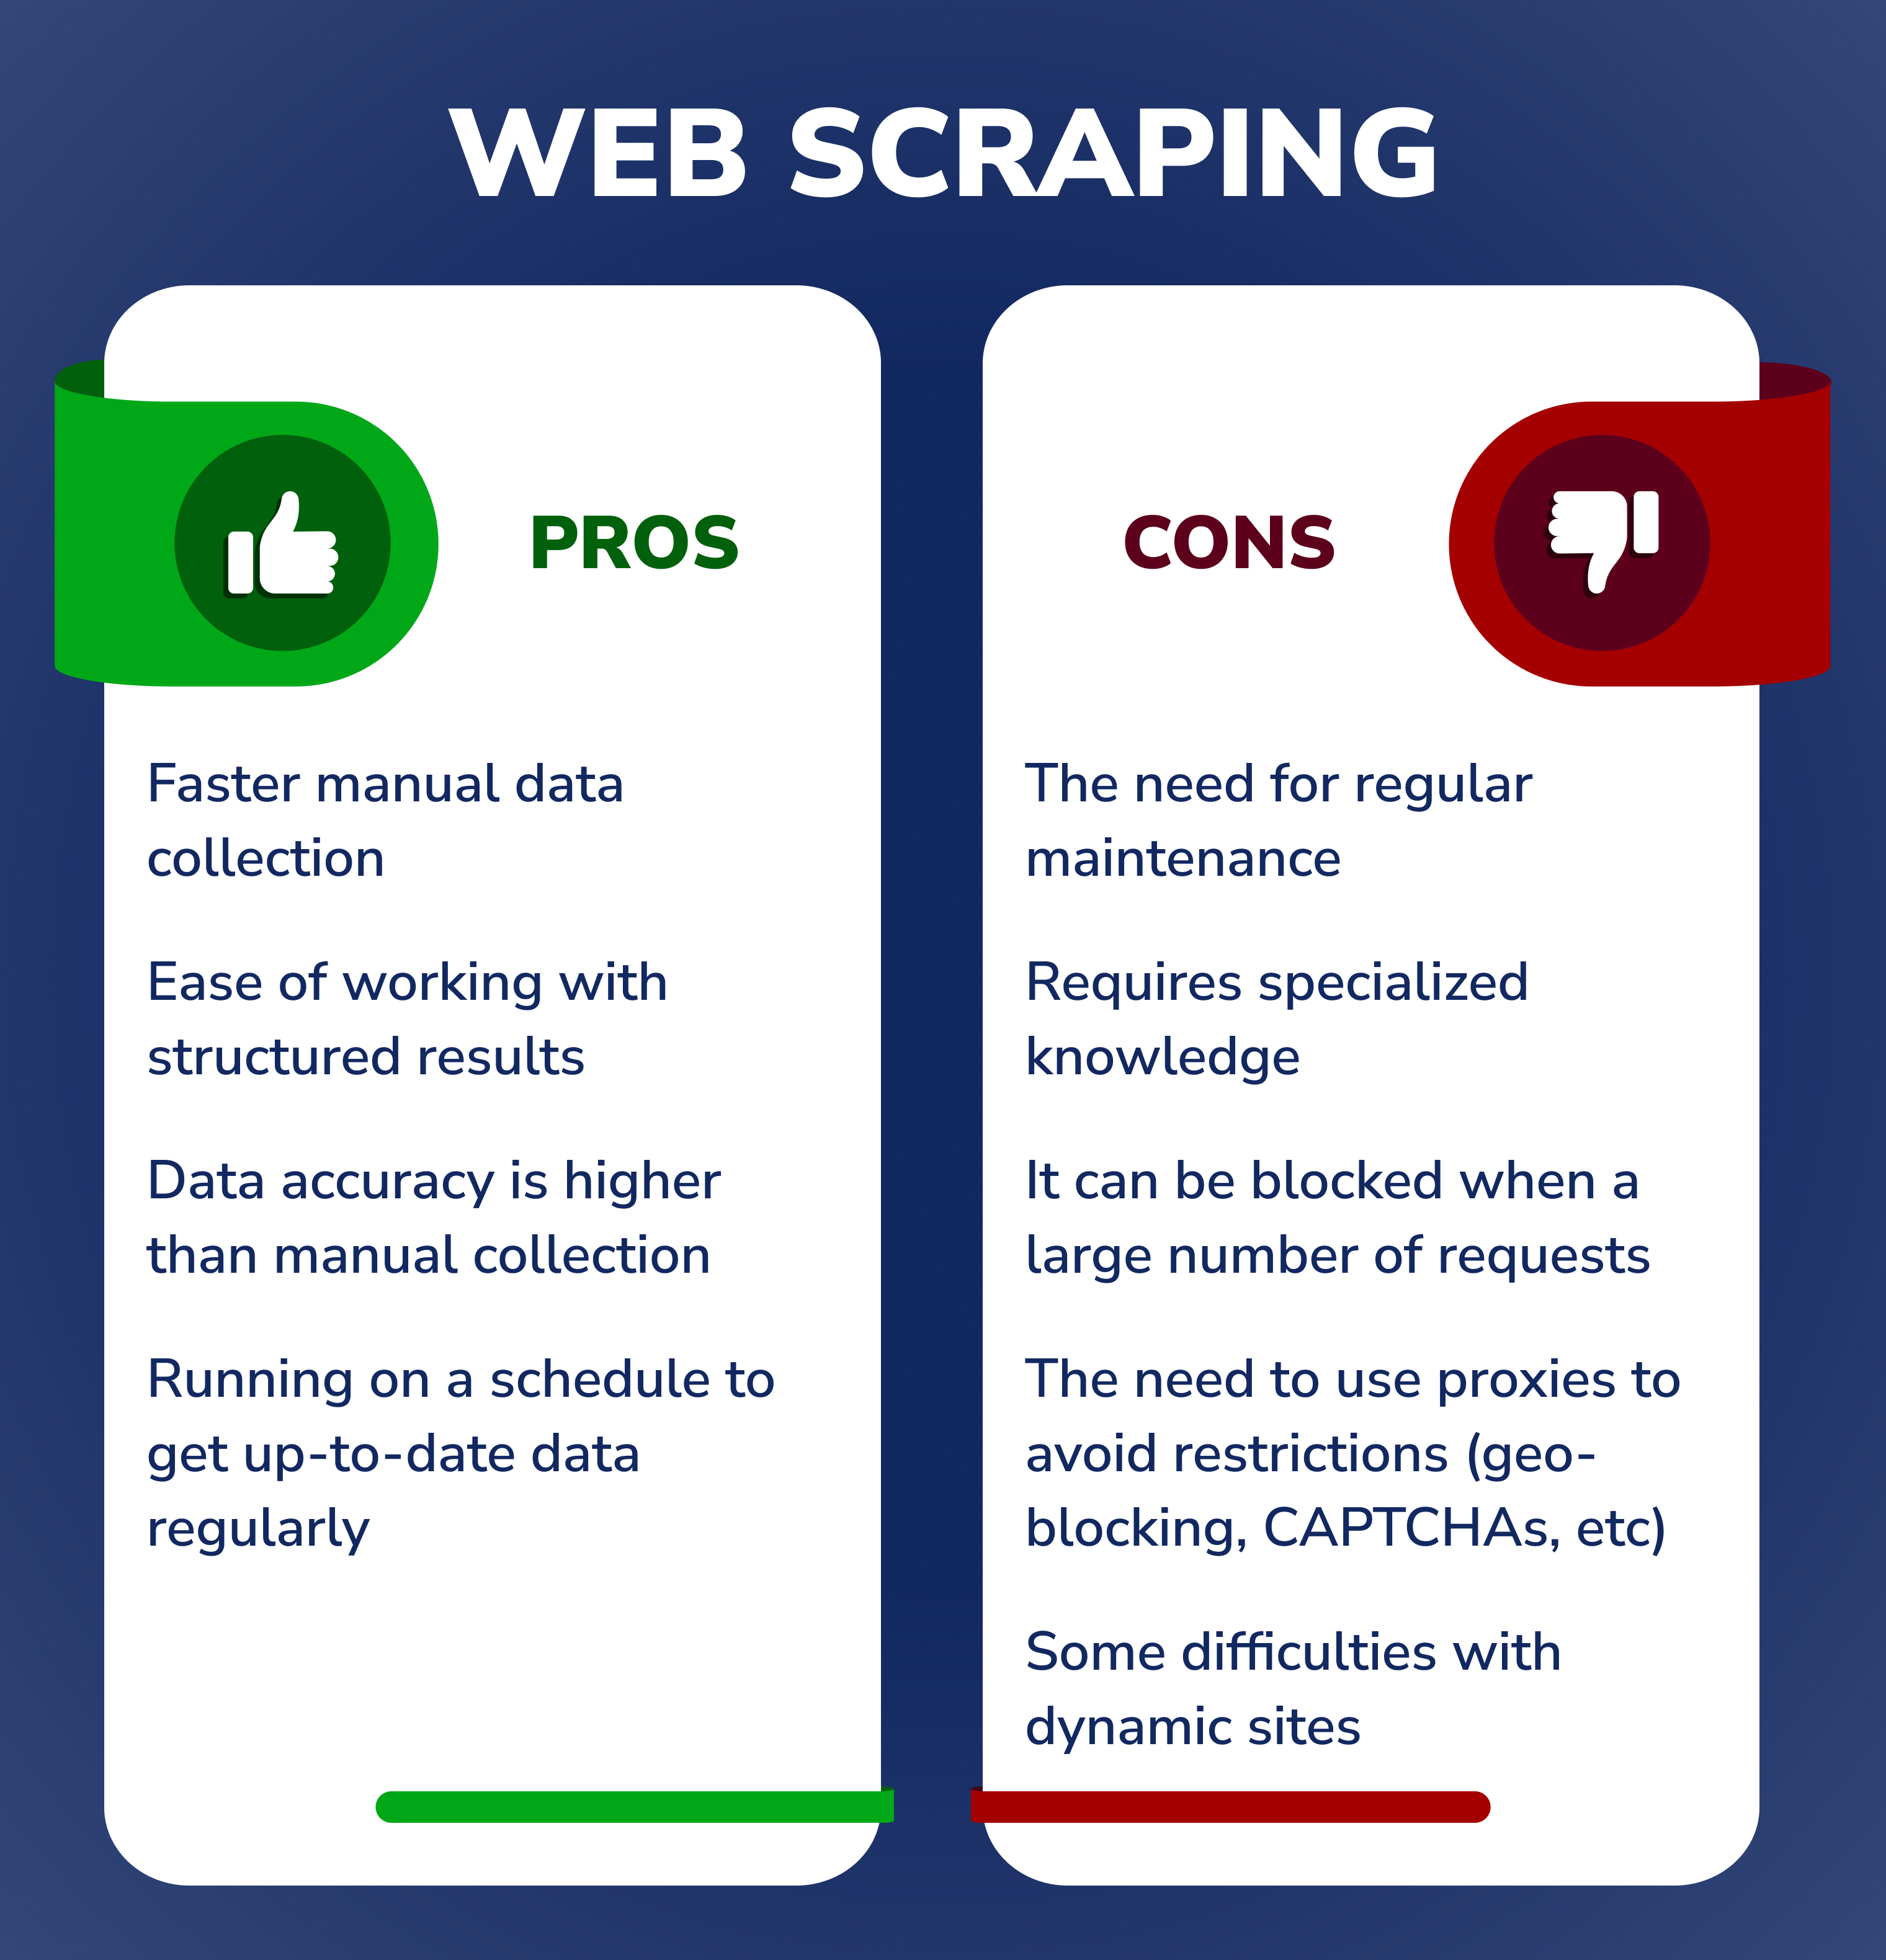 Pros and cons of web scraping